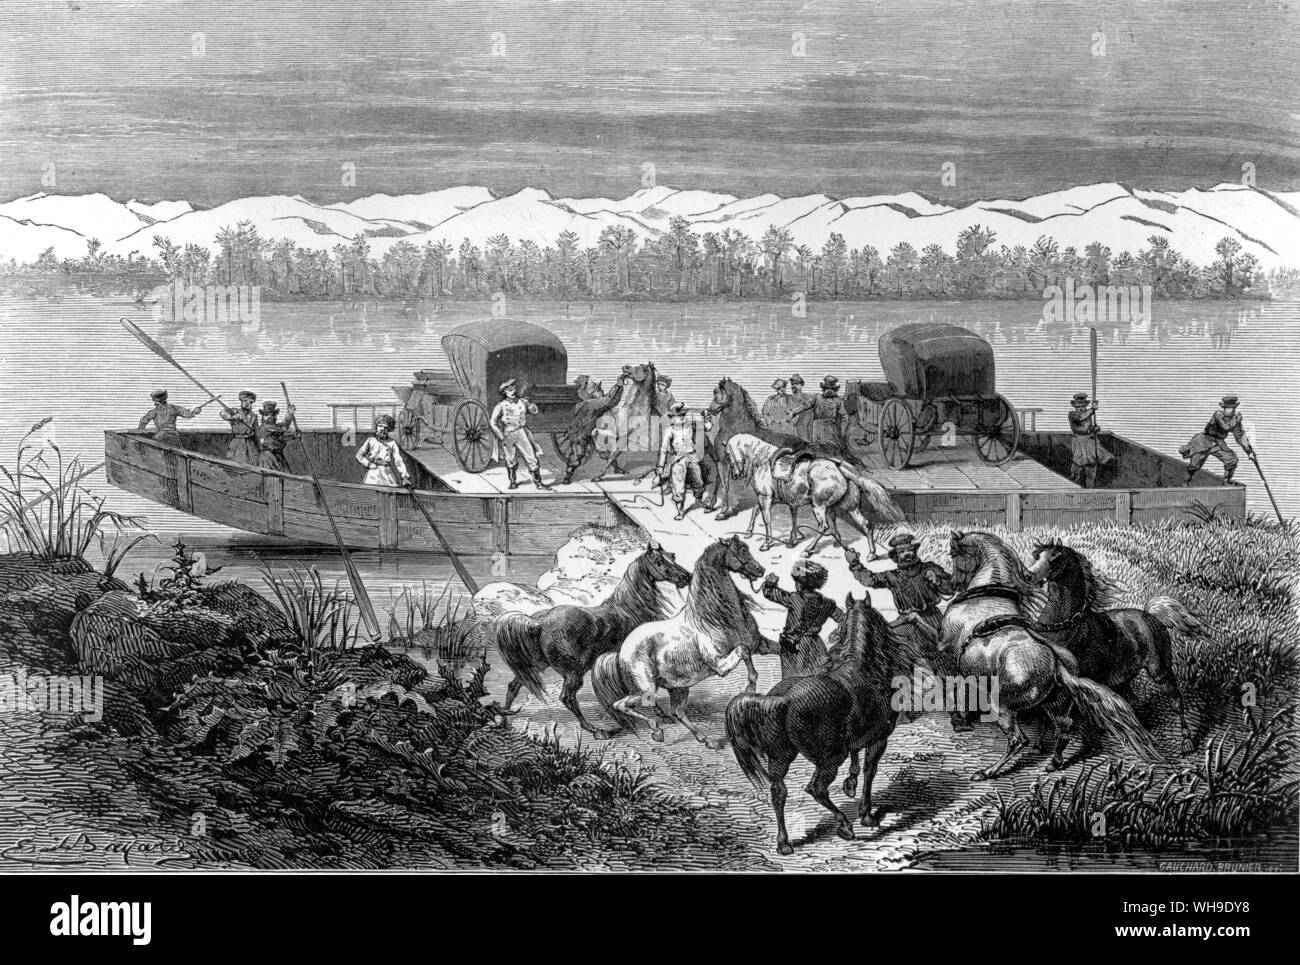 Ferrying travellers' carriages across the Irtysh in Siberia.  Humboldt had to make 53 such river crossings on his journey to Central Asia. Stock Photo